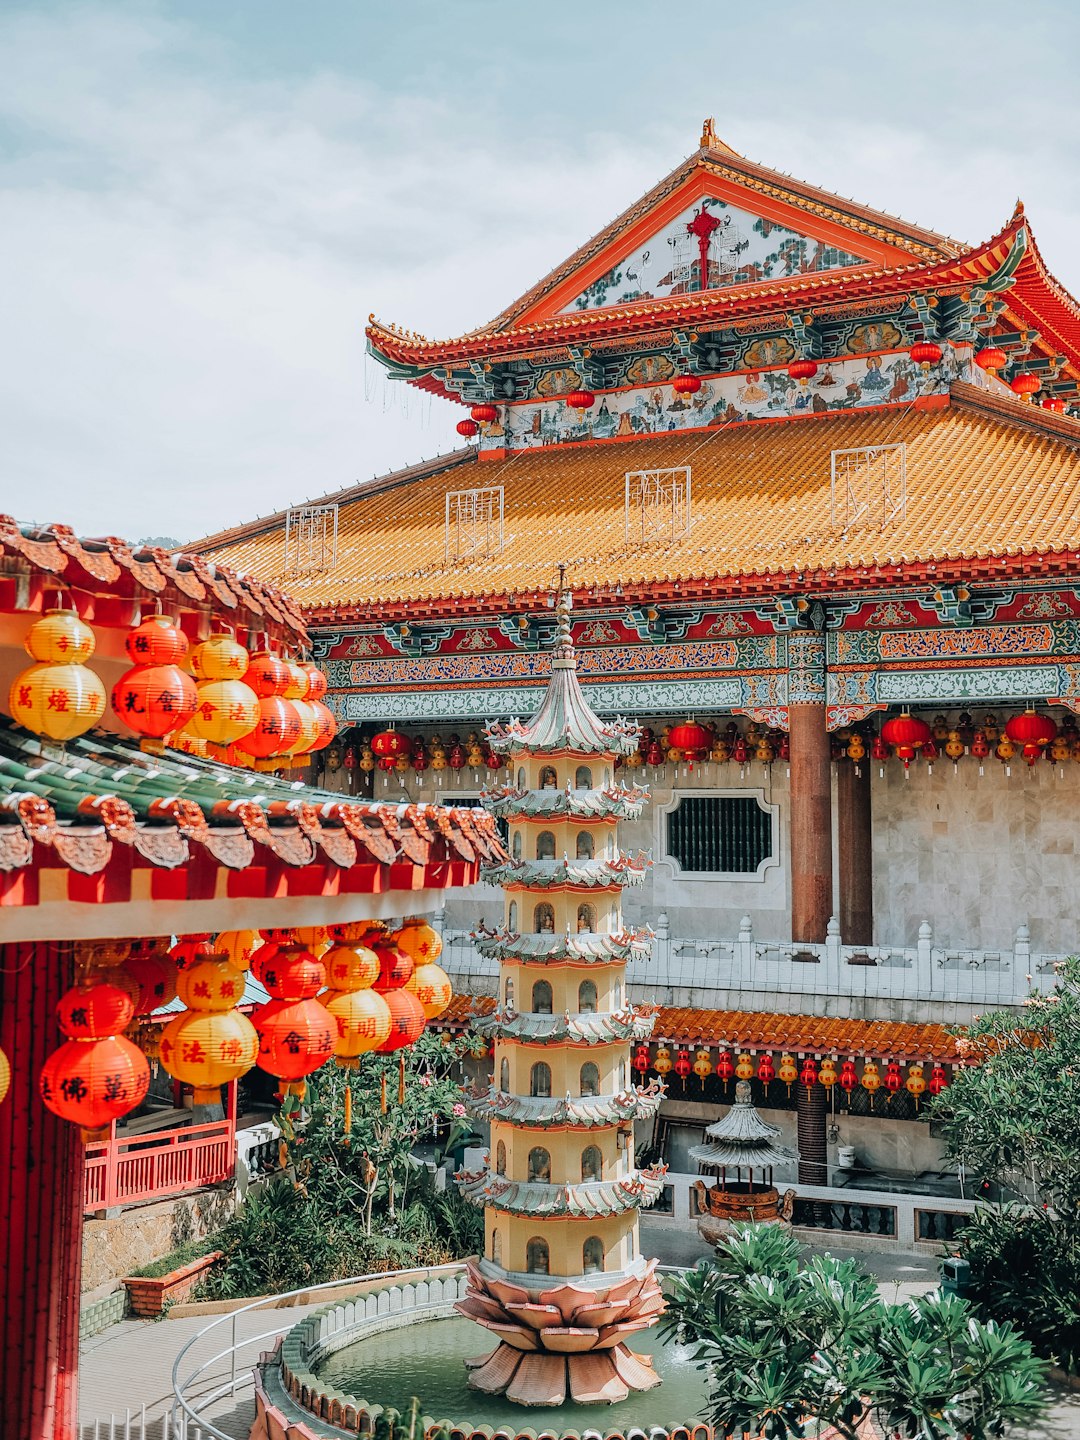 Travel Tips and Stories of Kek Lok Si Temple in Malaysia